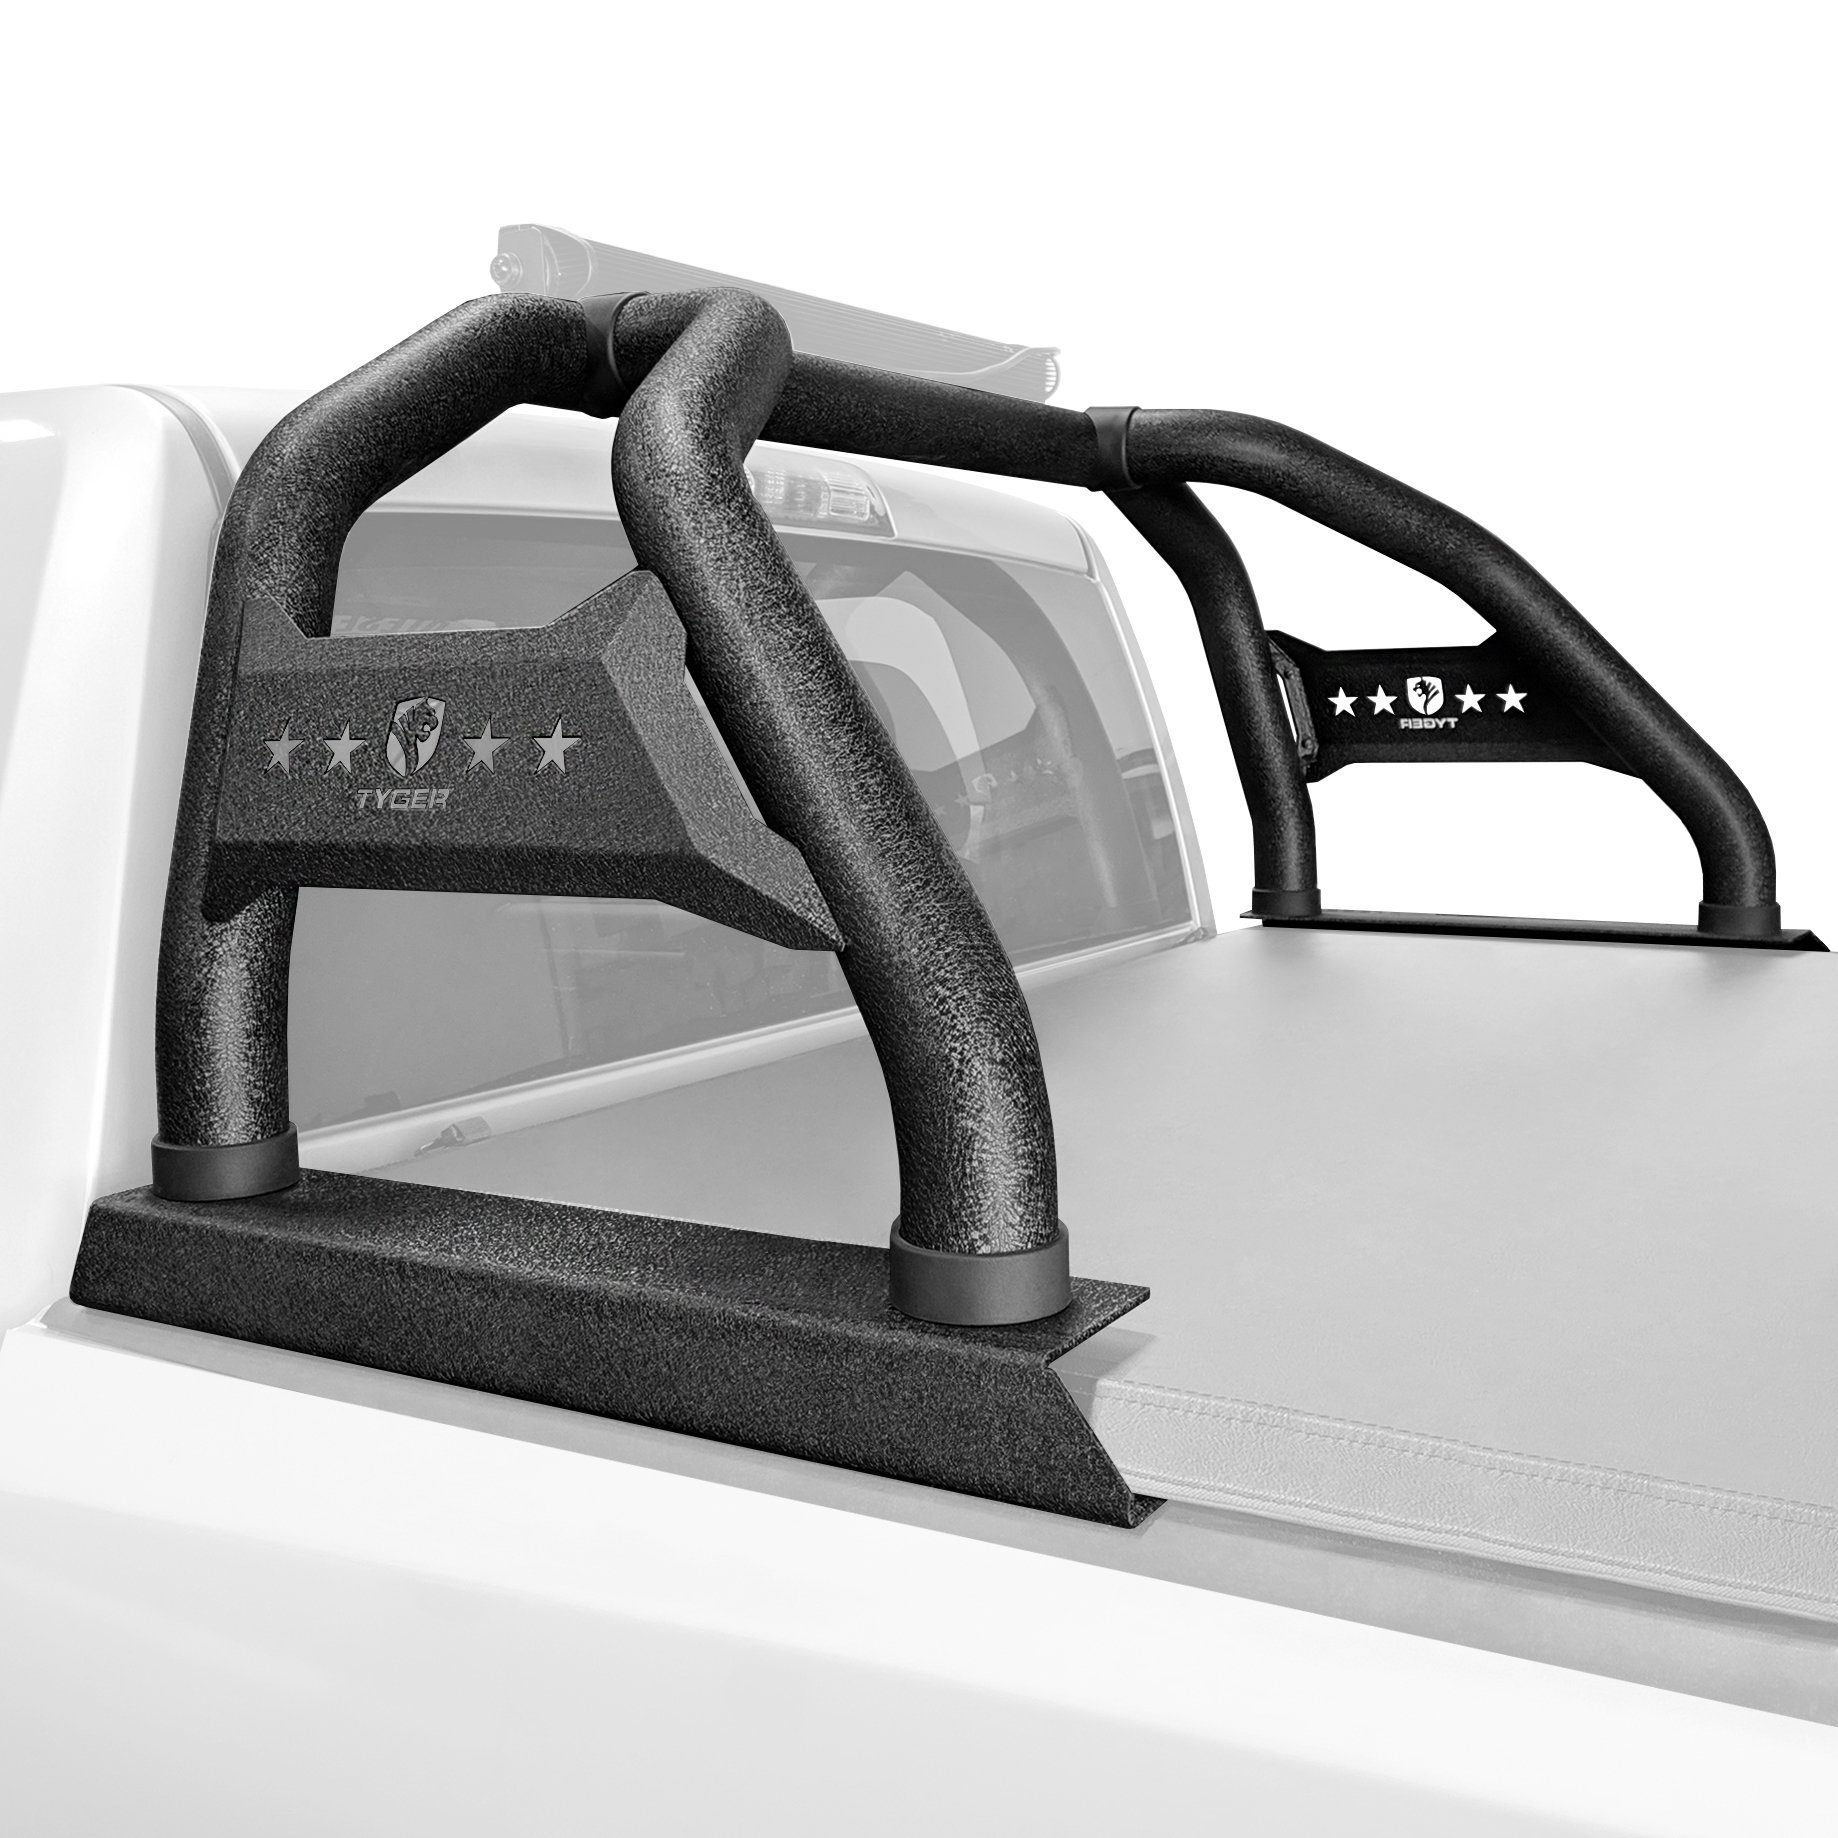 65 to 81 VEVOR Sport Bar Roll Bar Rack Premium Truck Accessories with Adjustable Height & Adjustable Width 22 to 31 Iron Plate Roll Bar Fits for Full Size Trucks/Silverado/Ram/F-150